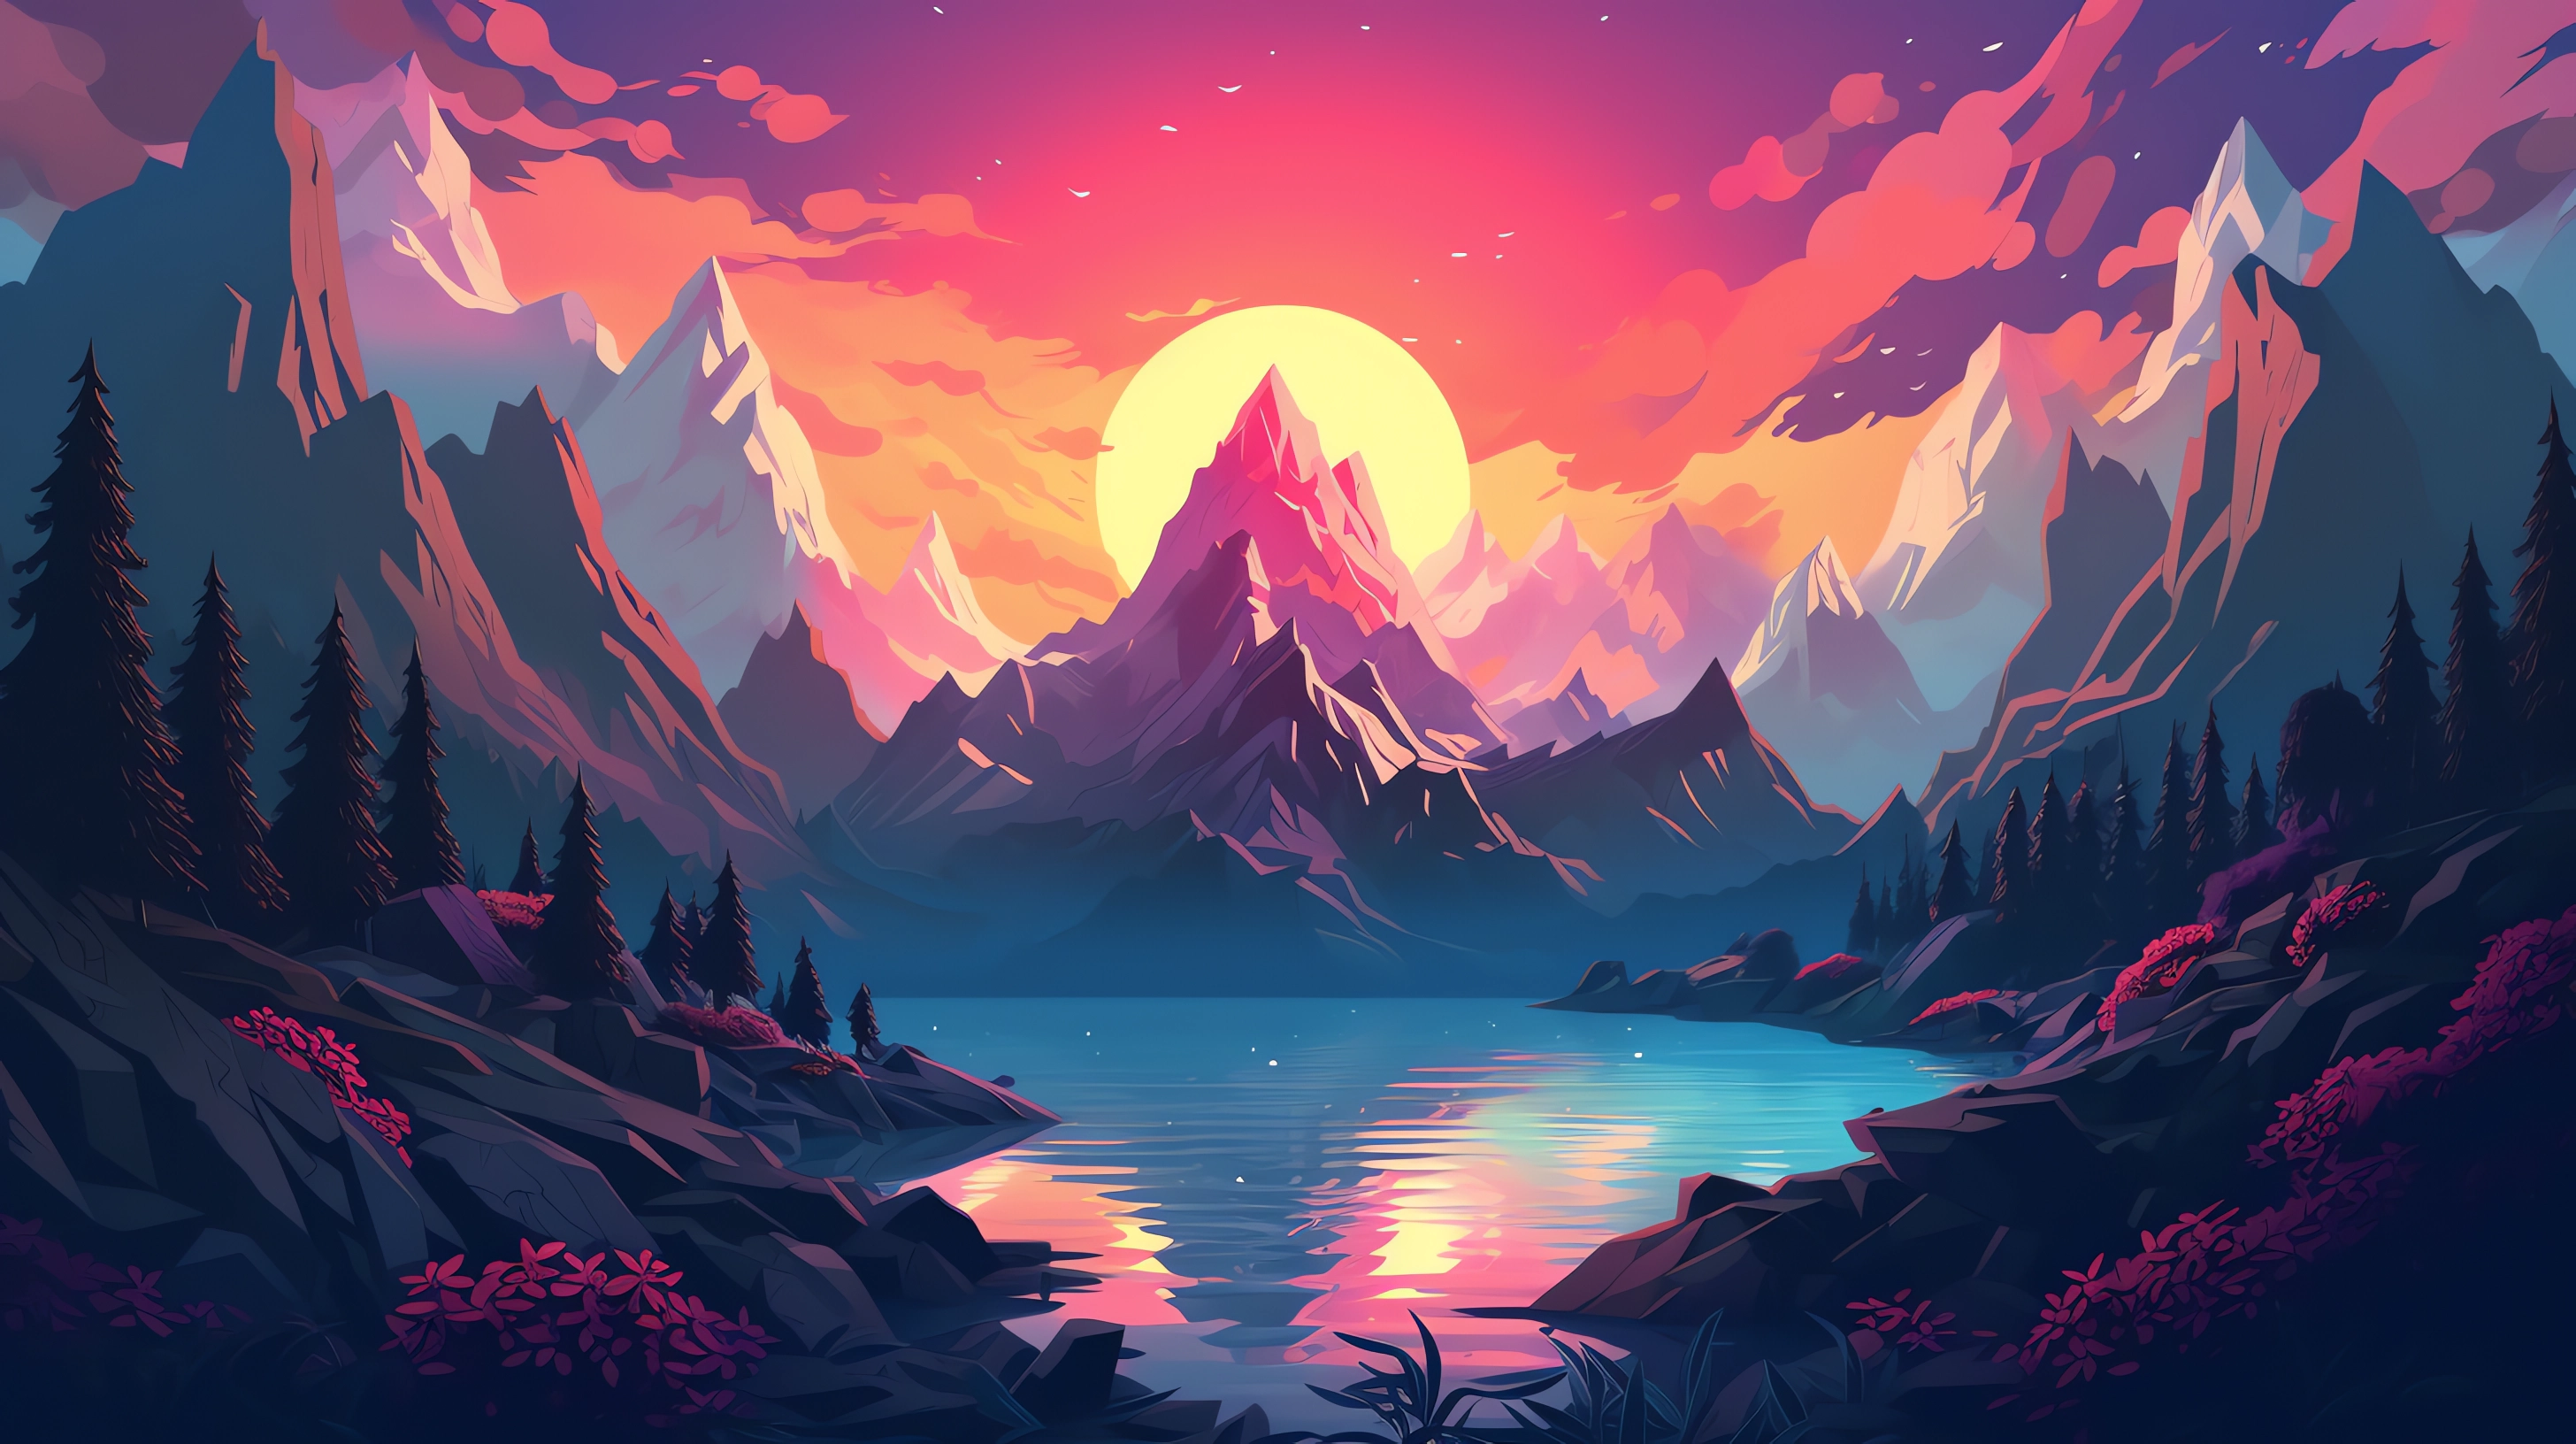 WALLPAPER 4K. VIBRANT MOUNTAIN AND FOREST SUNSET